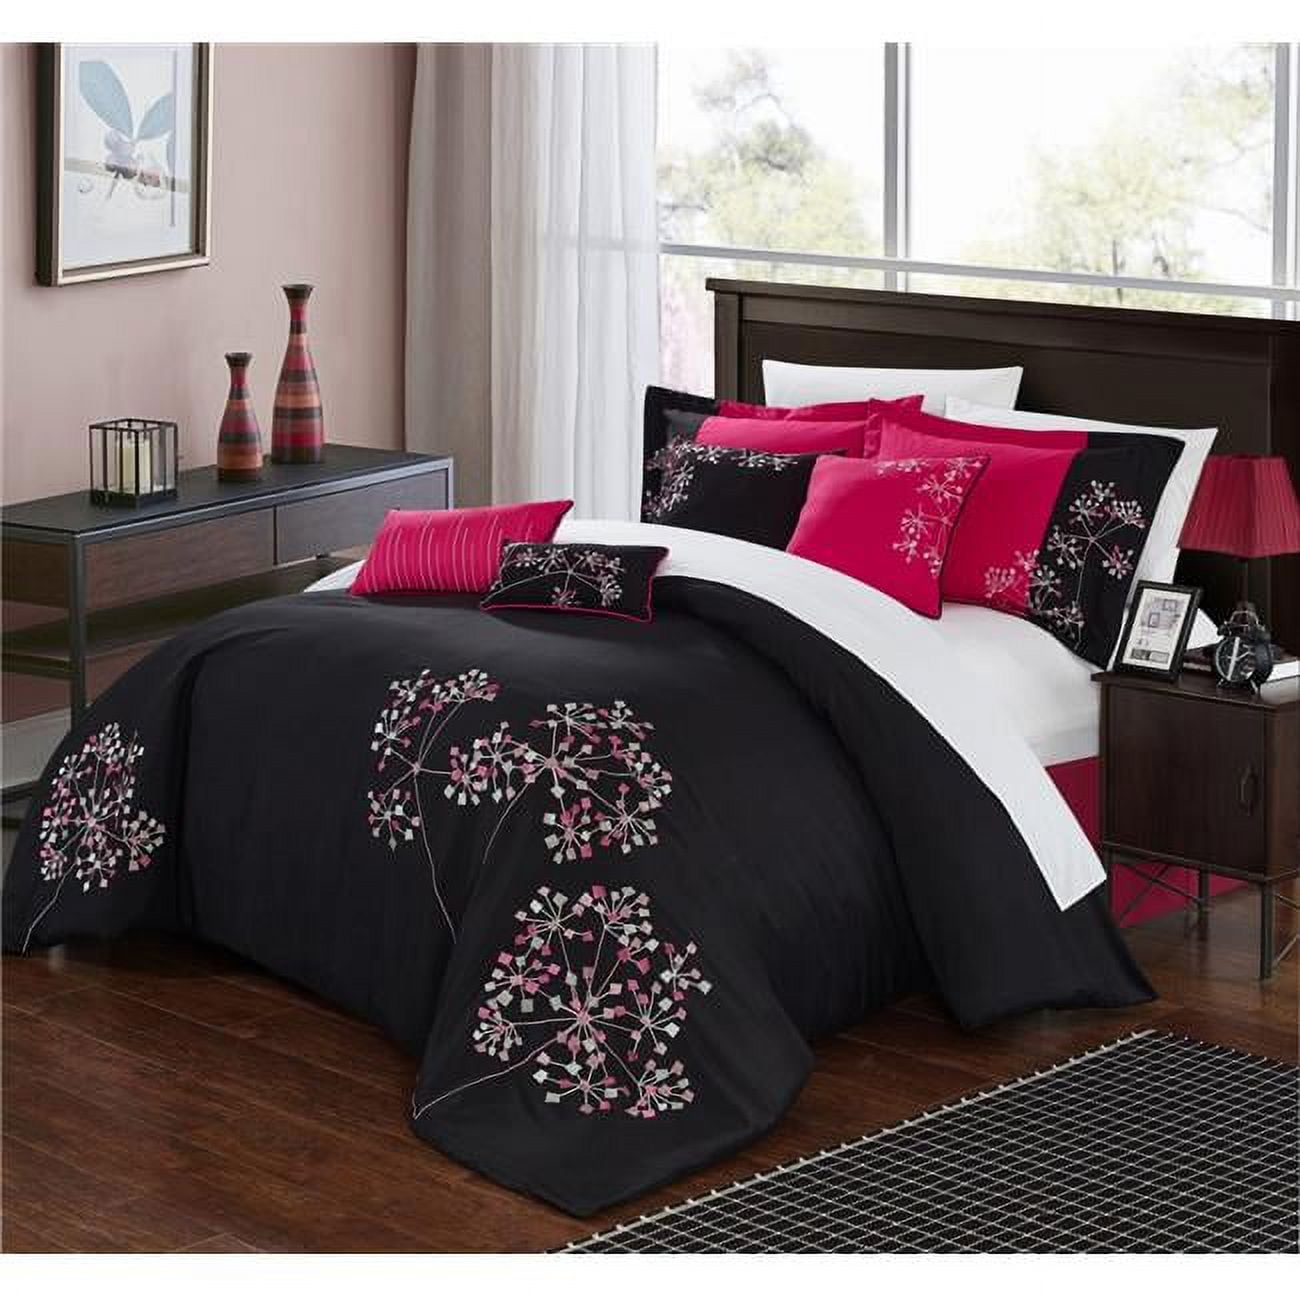 33-91-q-12-us Sydney Bed In A Bag Embroidered Comforter Set With 4 Piece Sheets - Queen - 12 Piece